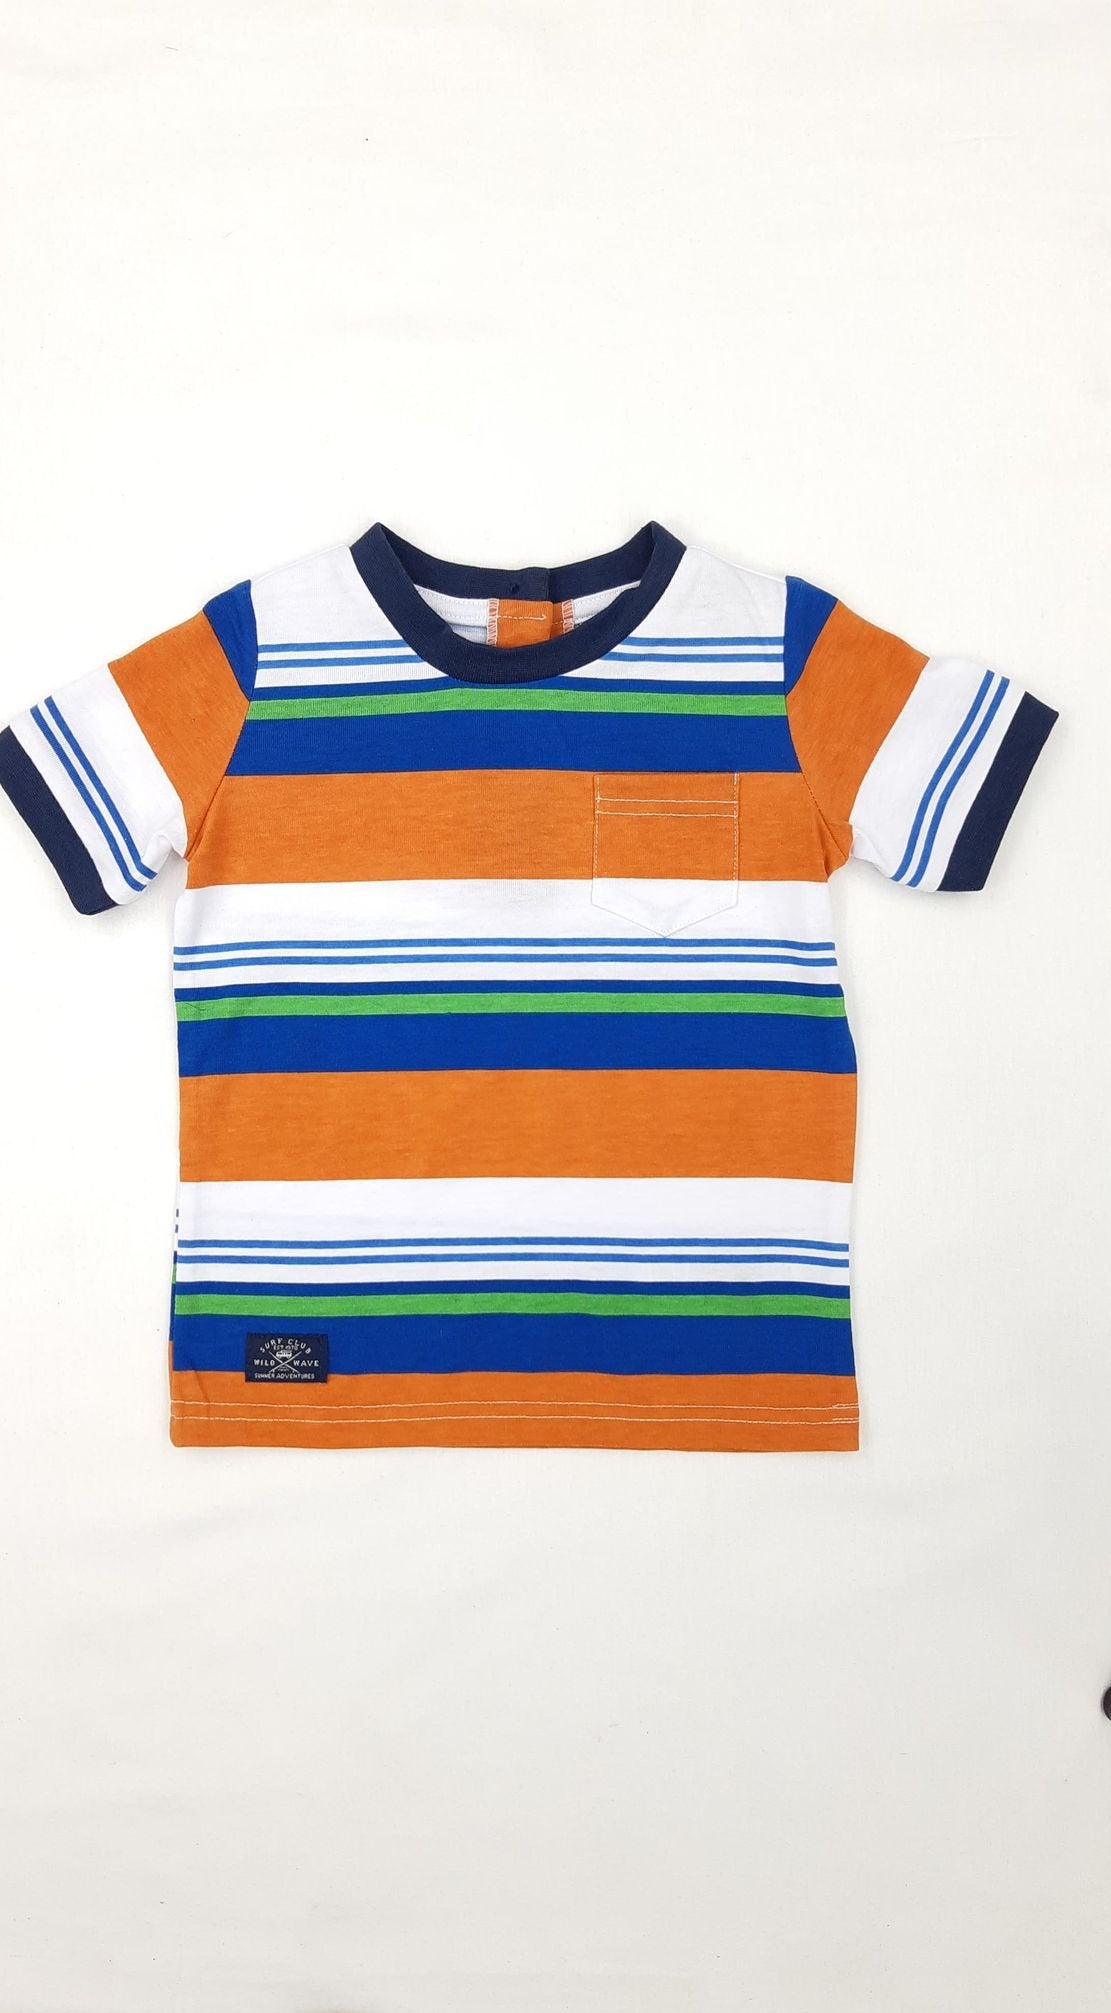 Mid ss21 t-shirt - 3 to 24 months